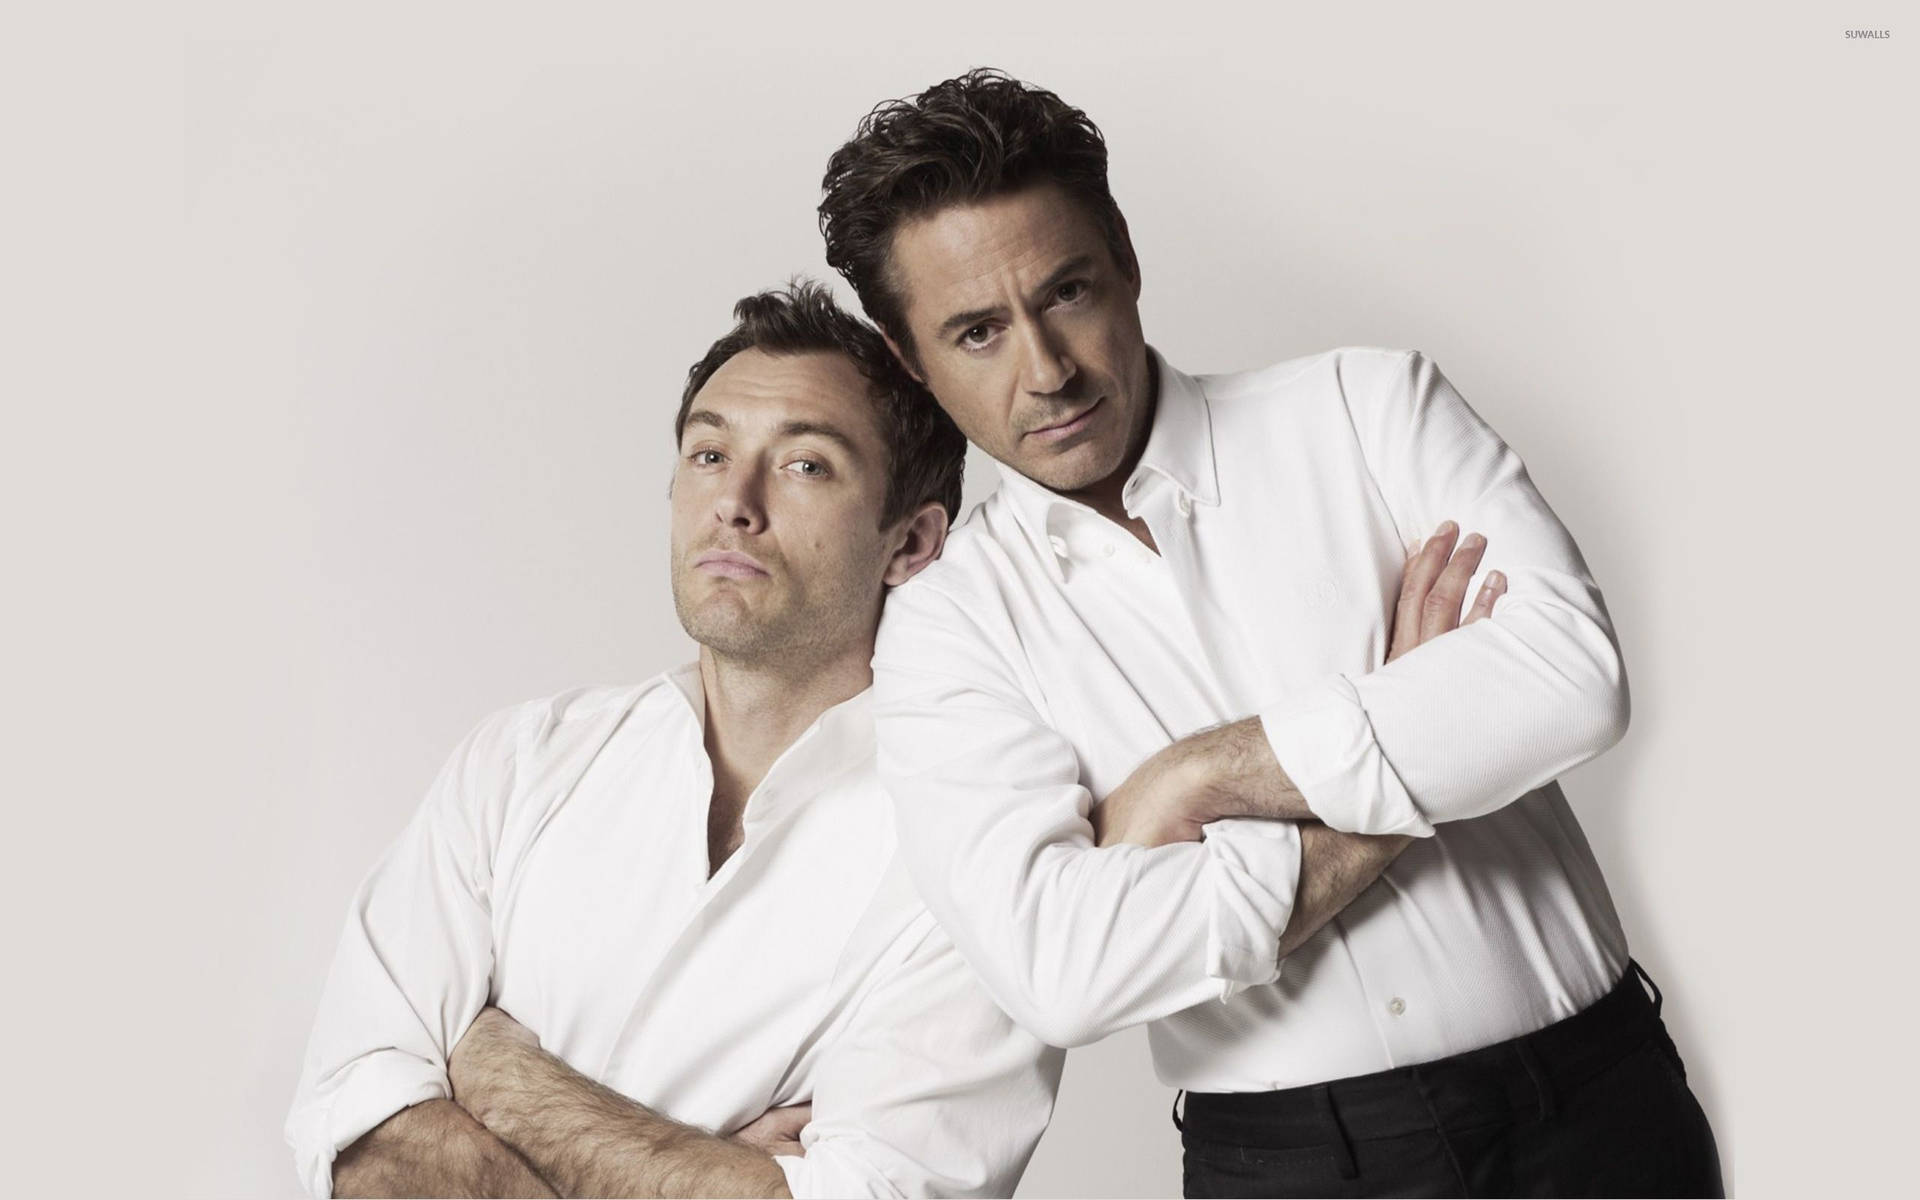 Robert Downey Jr. And Jude Law